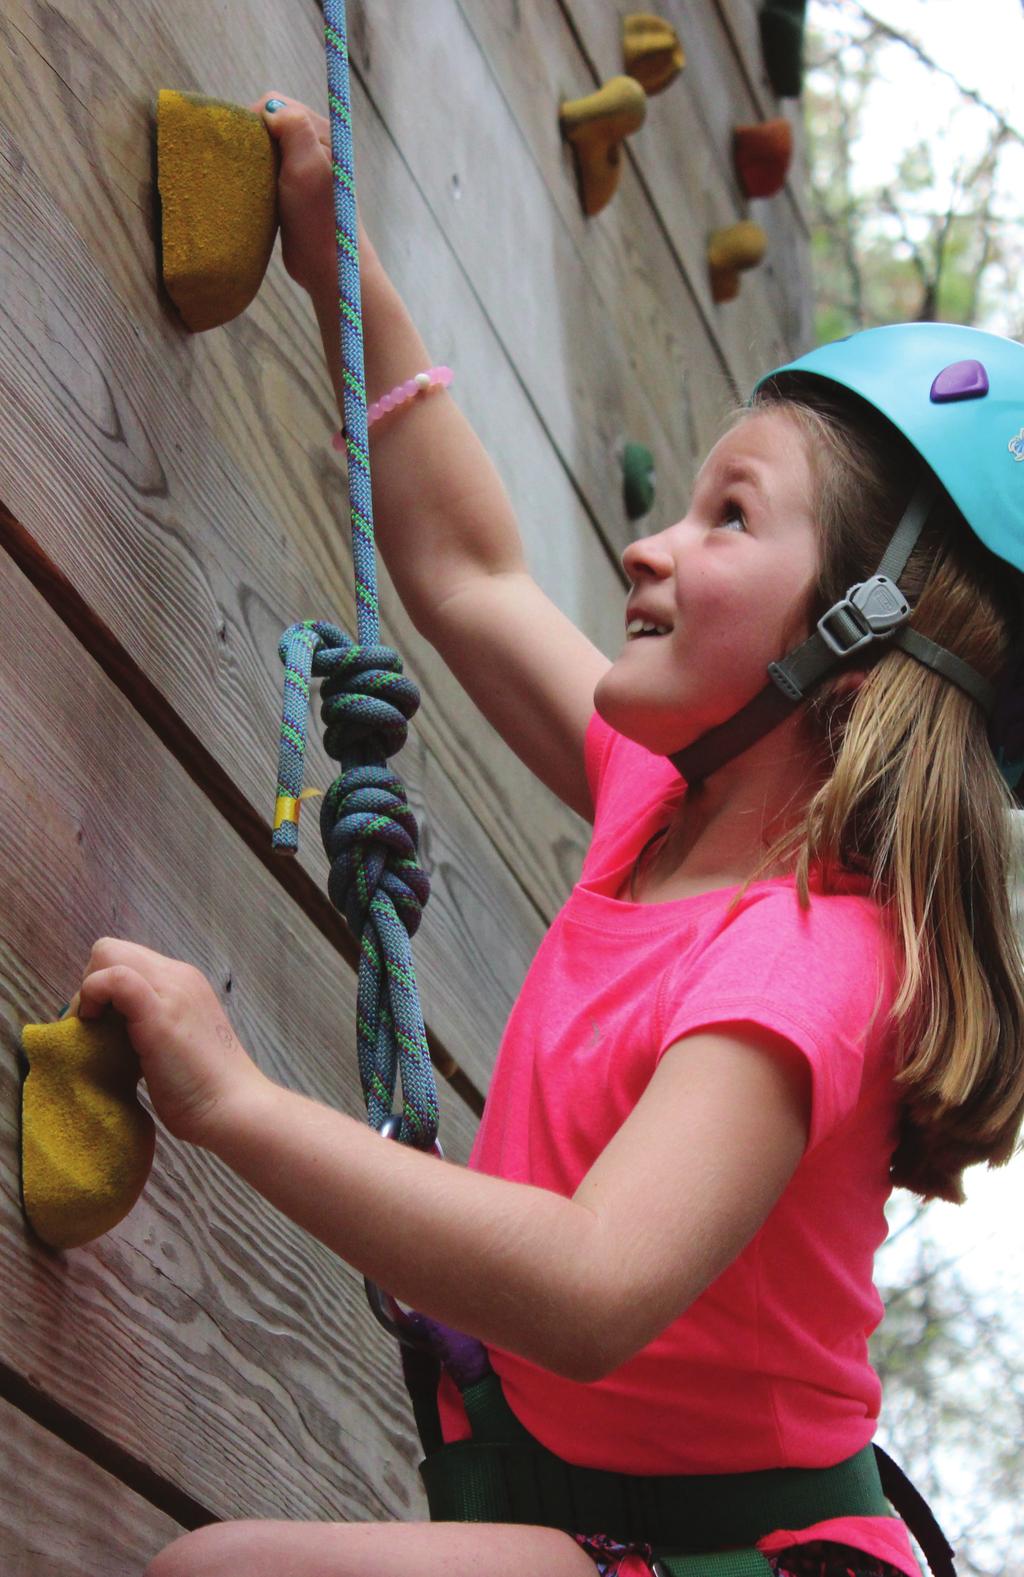 FUN EVENTS Our campus features a variety of adventures from archery, low ropes and wall climbing courses.